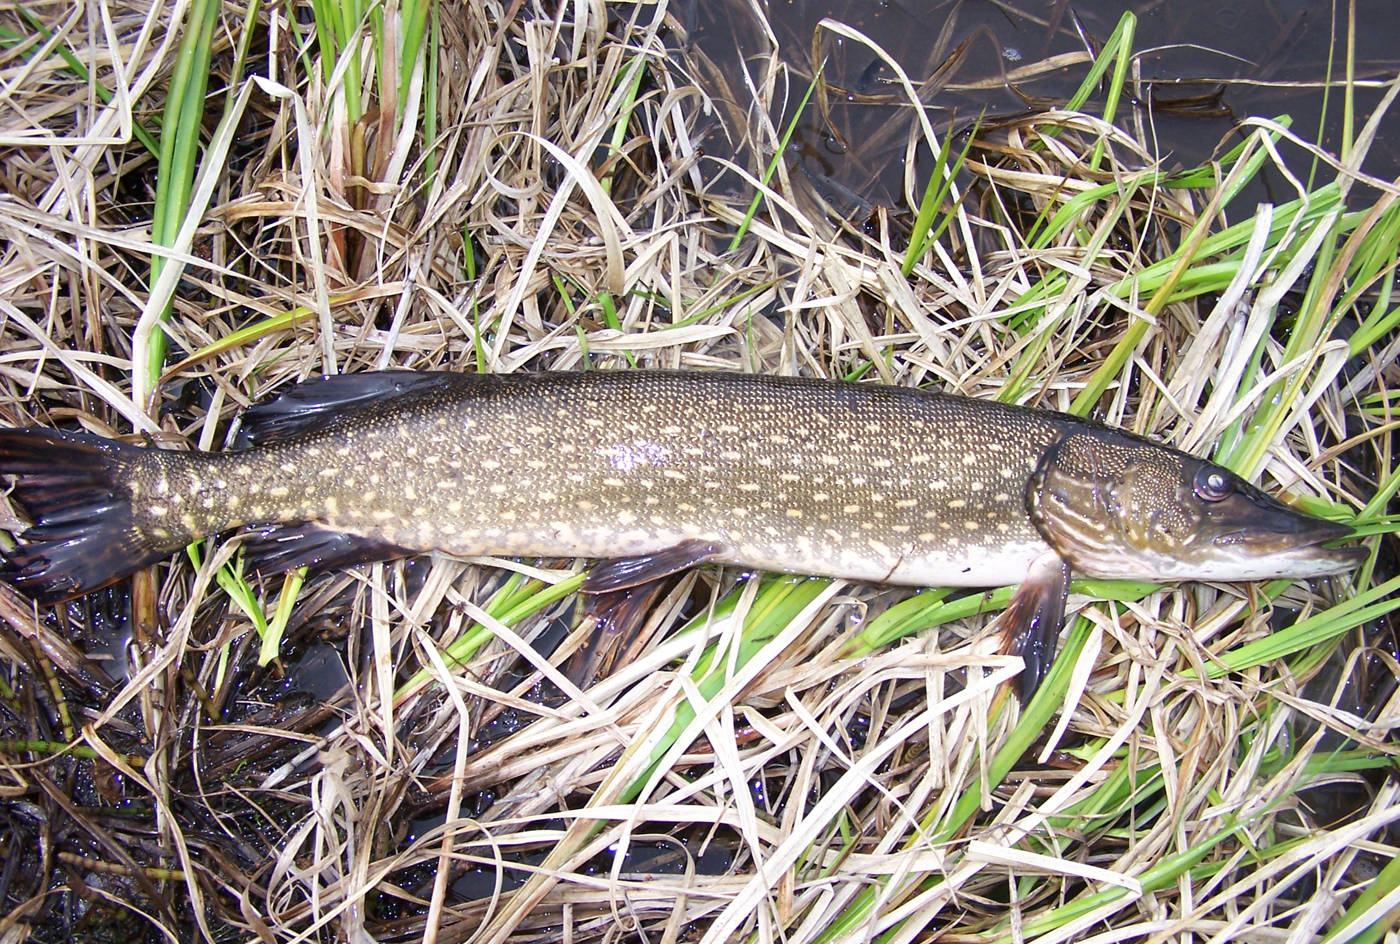 An invasive northern pike removed from Stormy Lake (Nikiski) in 2011. Pike have since been eradicated there and in many other areas on the Kenai Peninsula to protect native fisheries. (Photo provided)